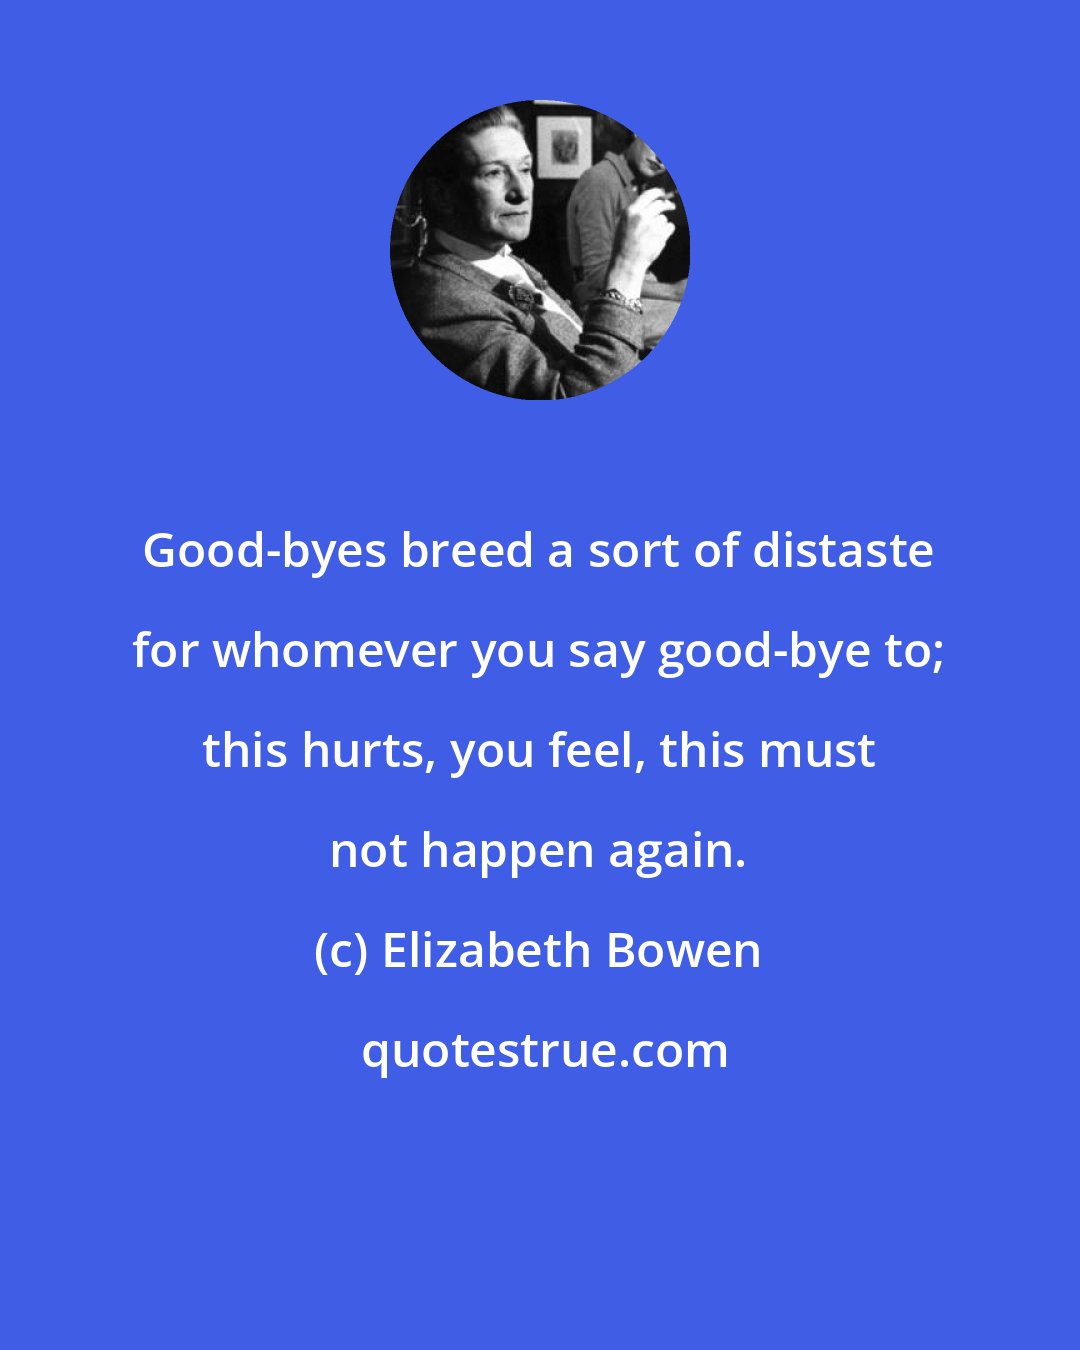 Elizabeth Bowen: Good-byes breed a sort of distaste for whomever you say good-bye to; this hurts, you feel, this must not happen again.